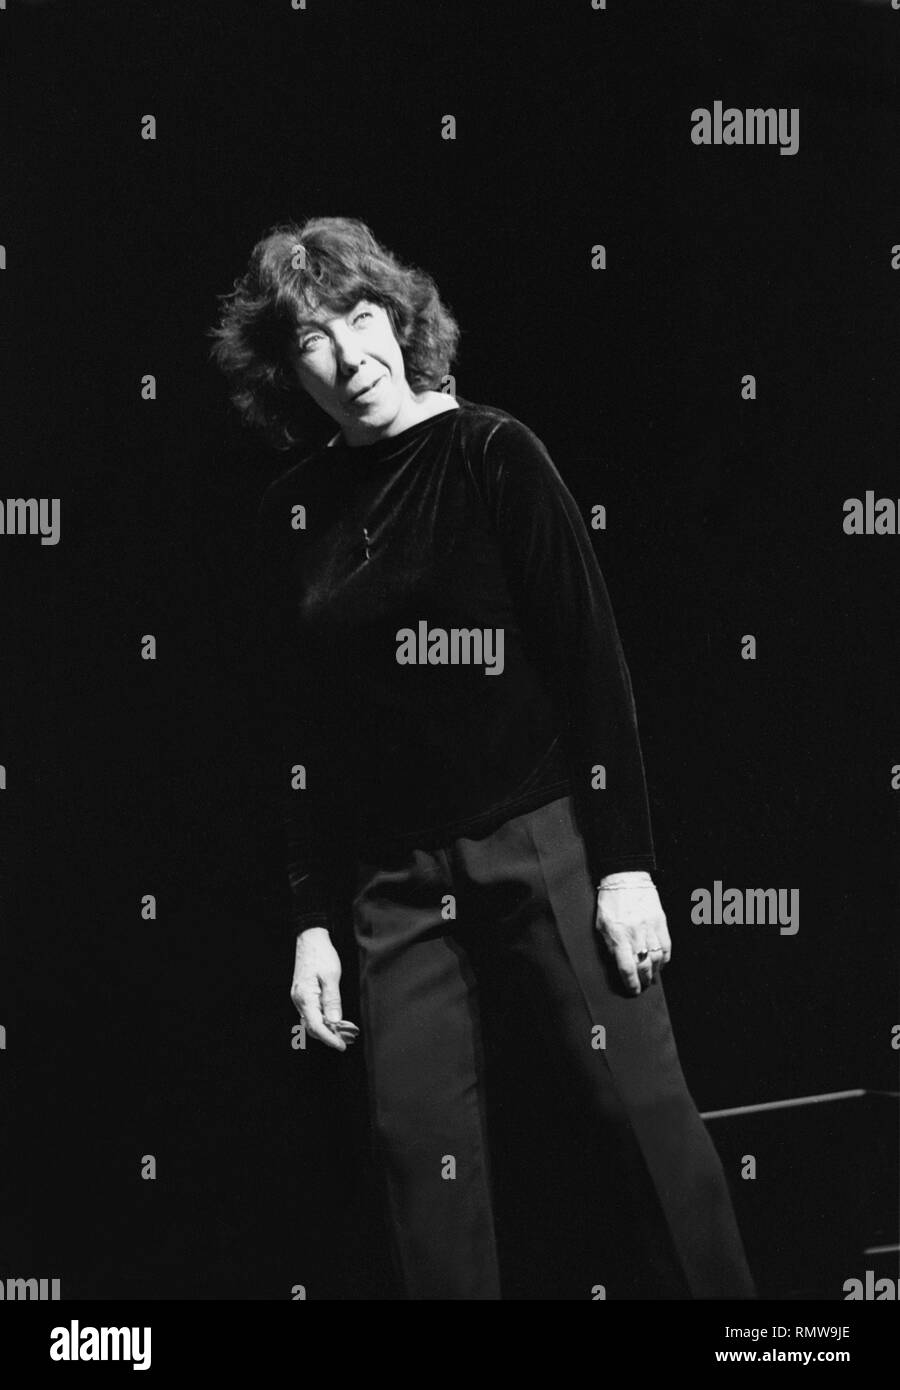 Actress, comedian, writer, and producer Lily Tomlin is shown performing on stage during a 'live' stand up comedy show. Stock Photo